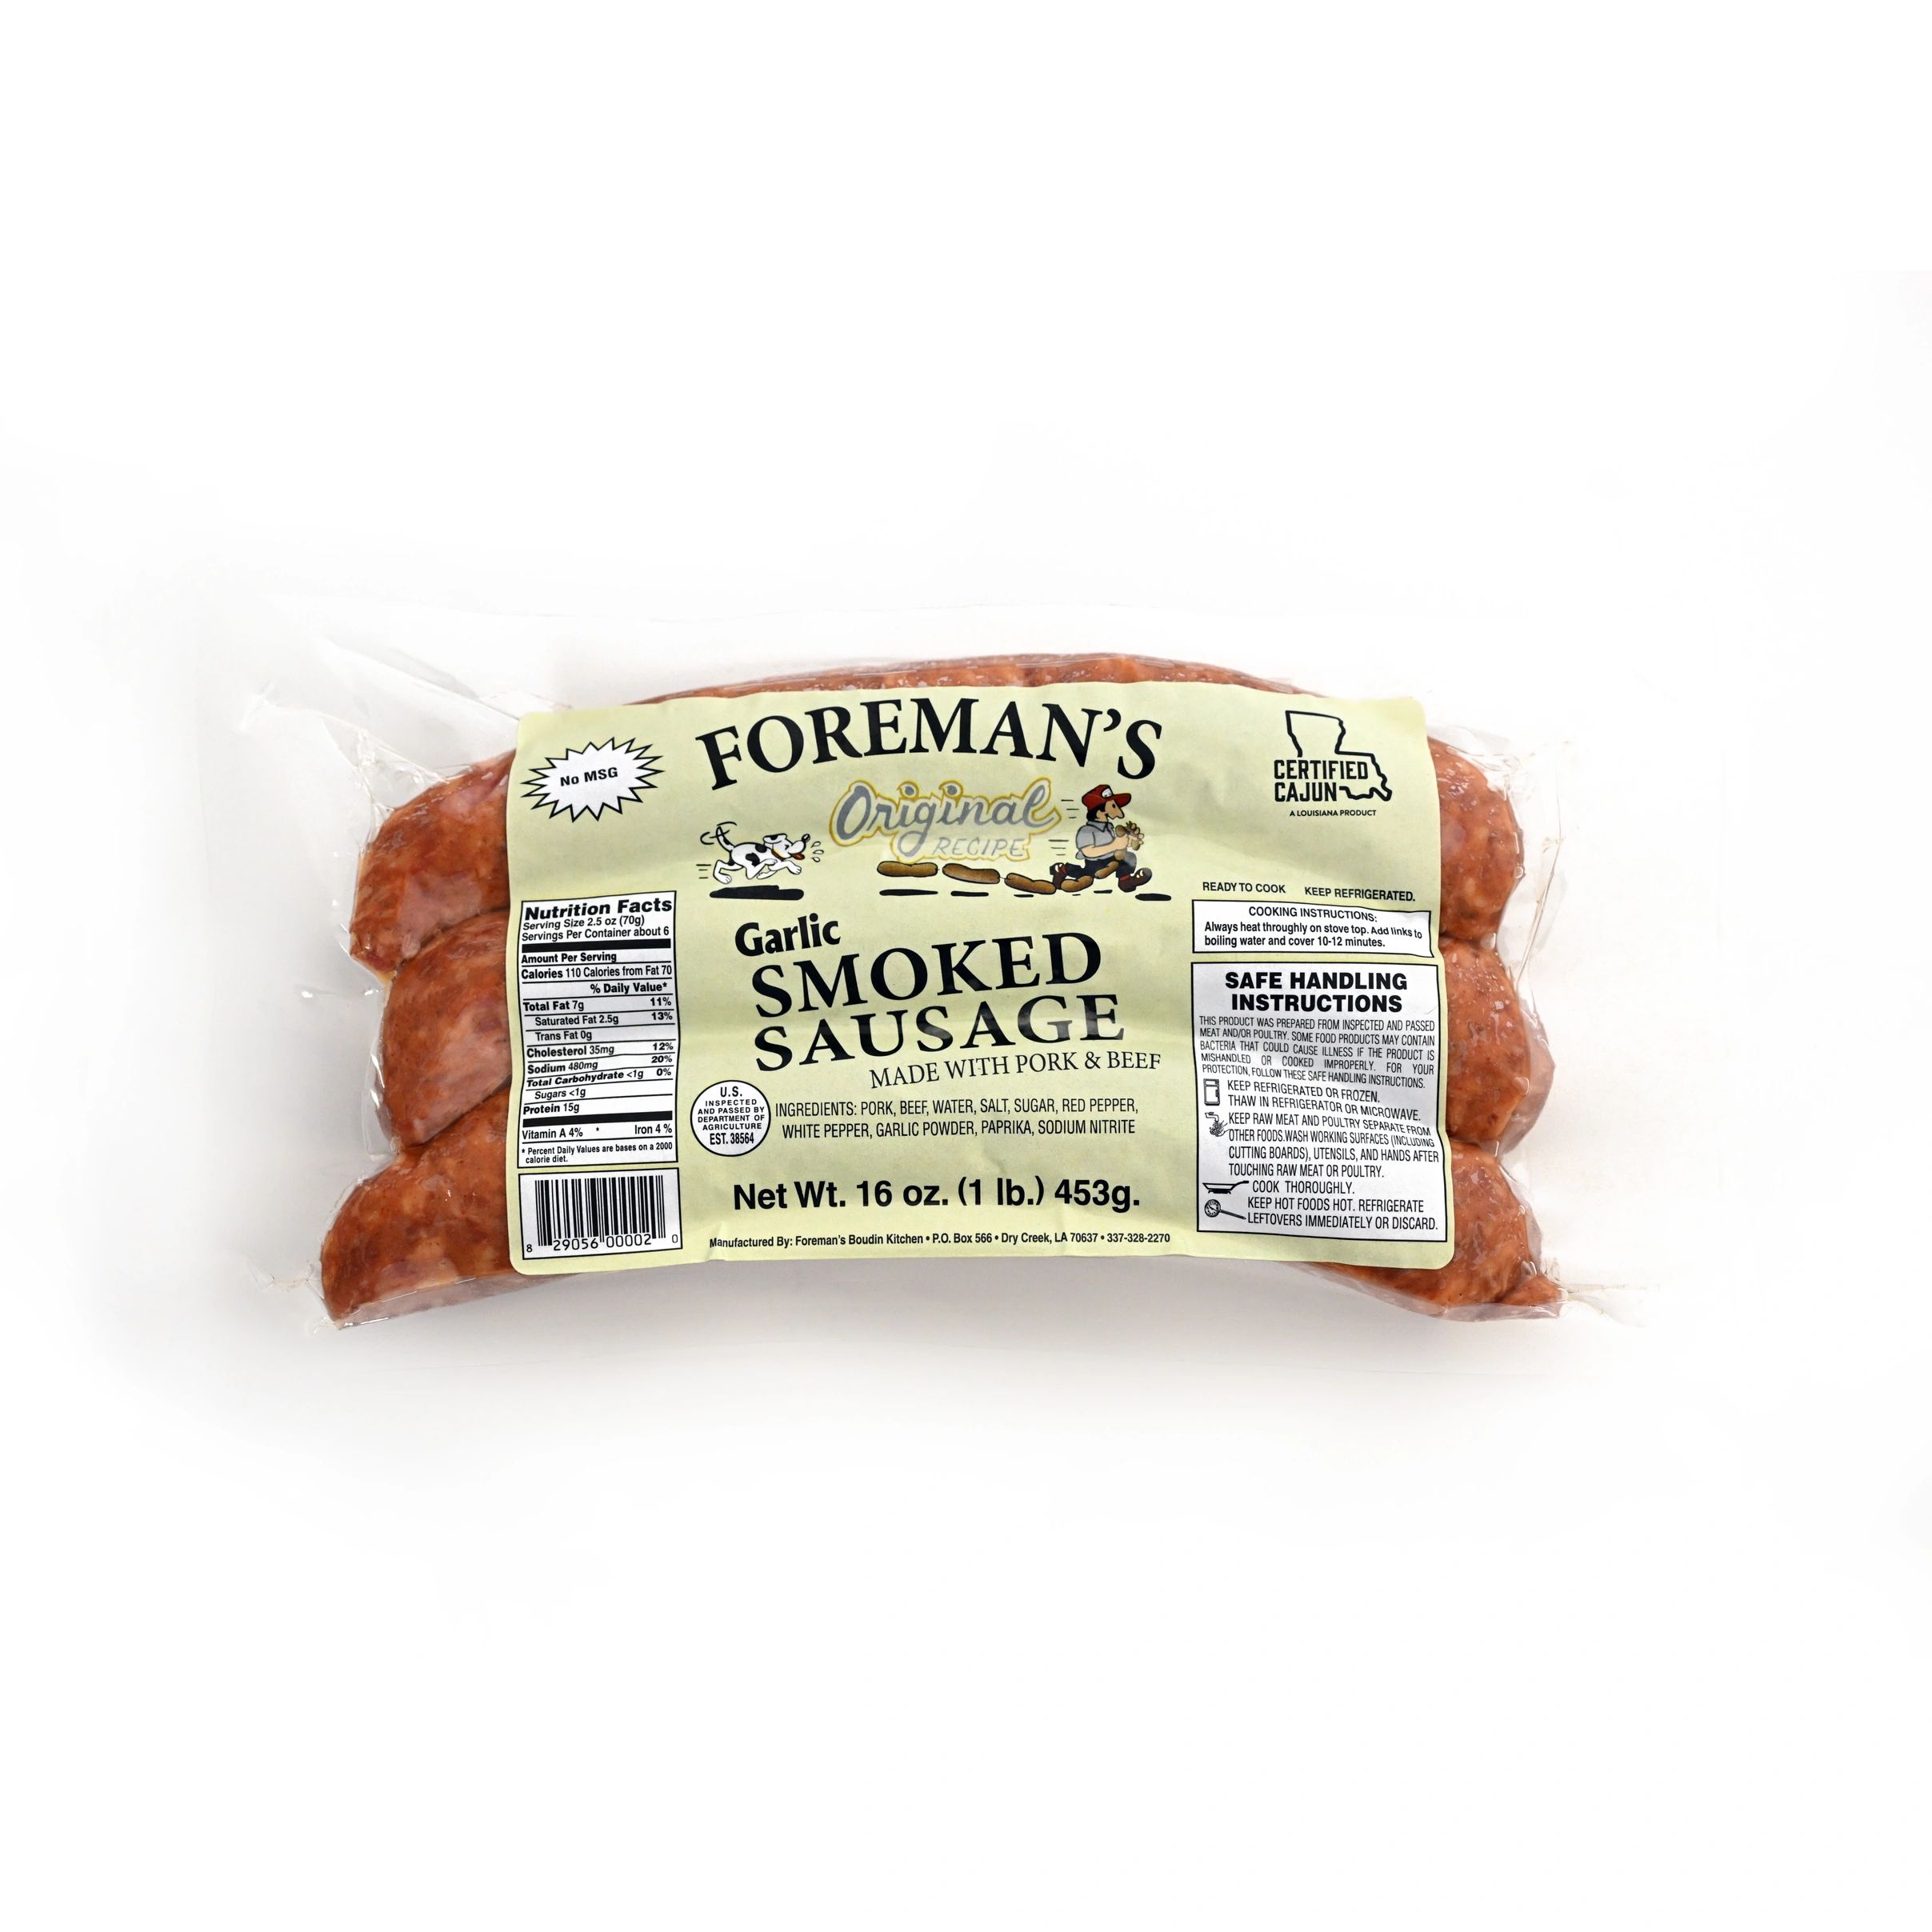 Foremans Garlic Smoked Sausage made with beef and pork in 16 oz package on a white background.